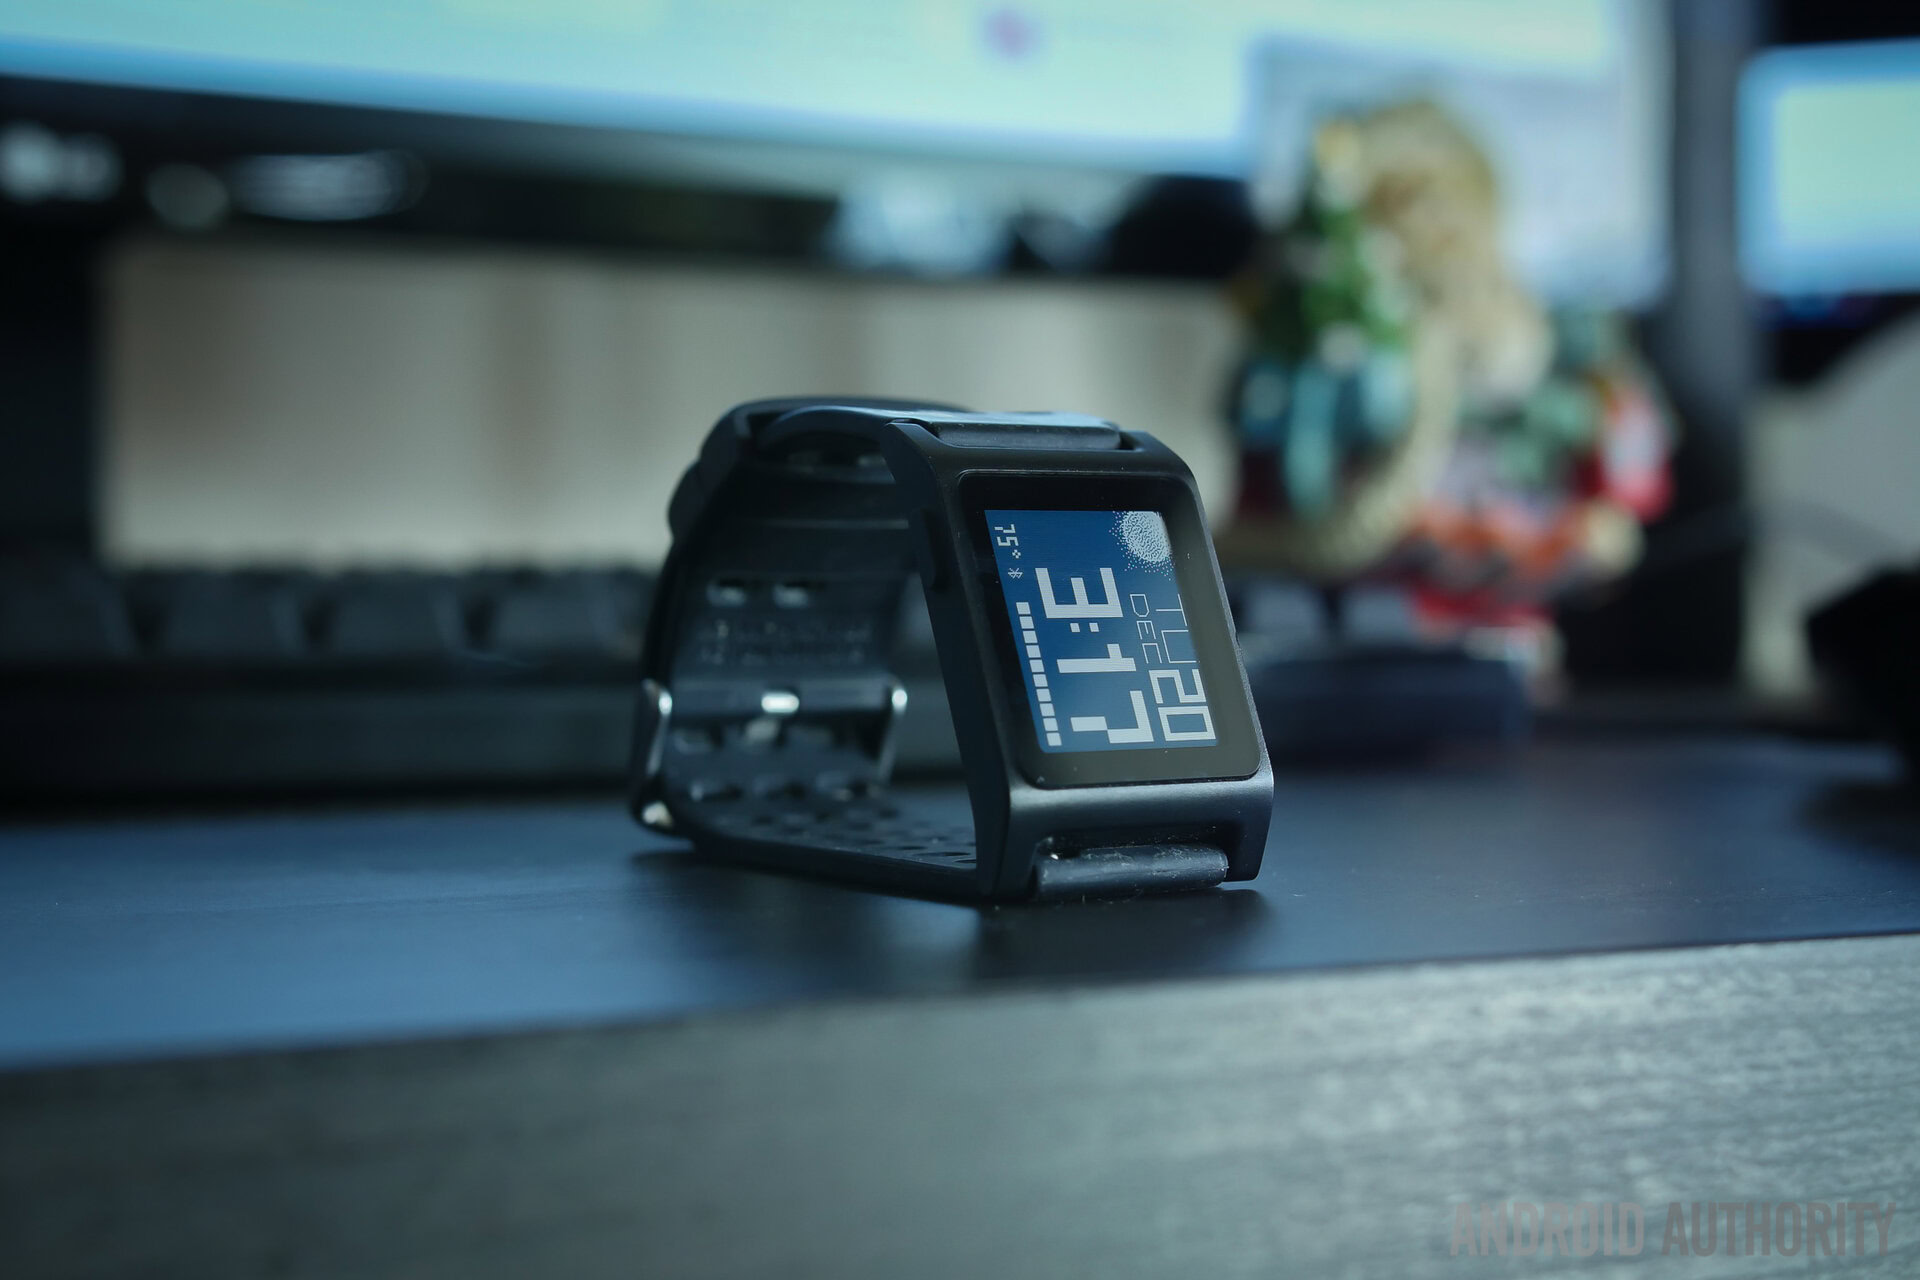 The Last Pebble: Pebble 2 review and with MrMobile - Android Authority